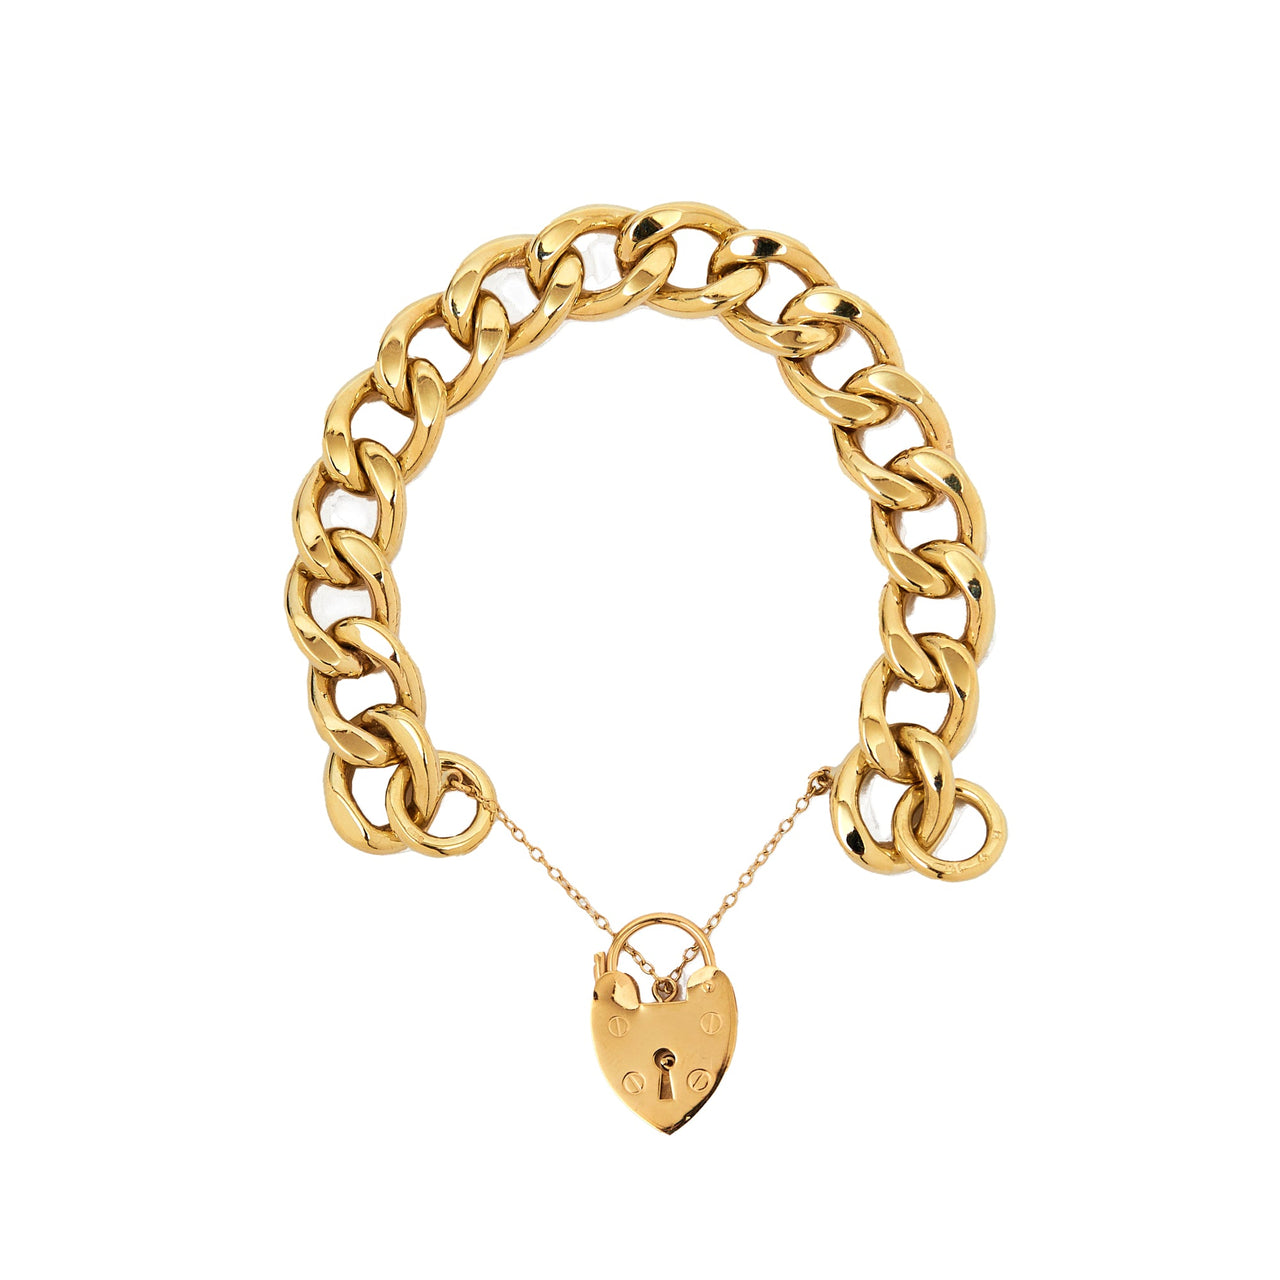 Pre-Owned 9ct Gold Curb Chain Bracelet With Heart Padlock